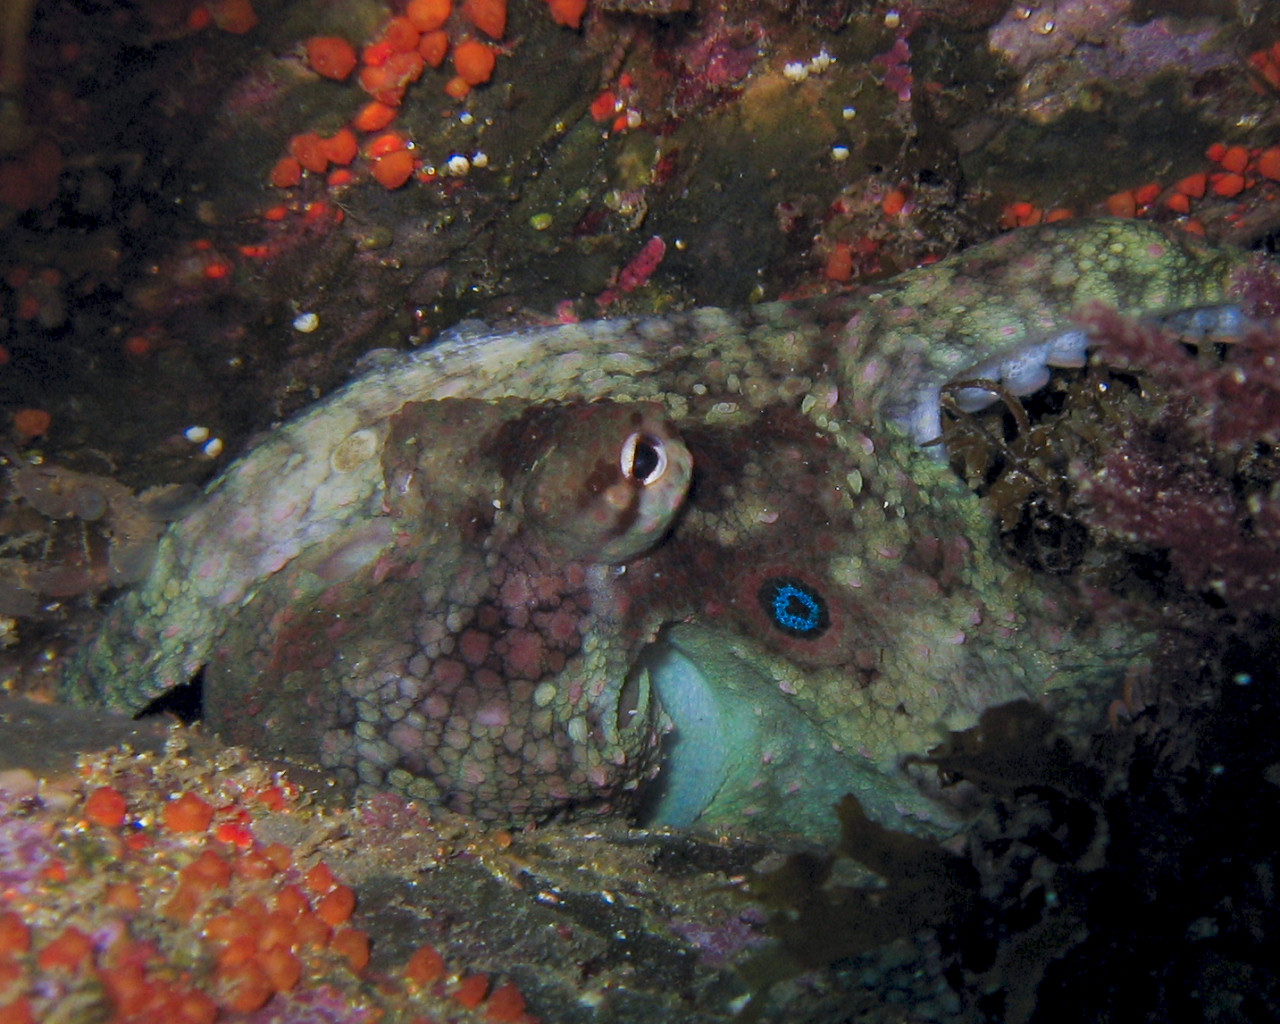 Octopus with a blue ring